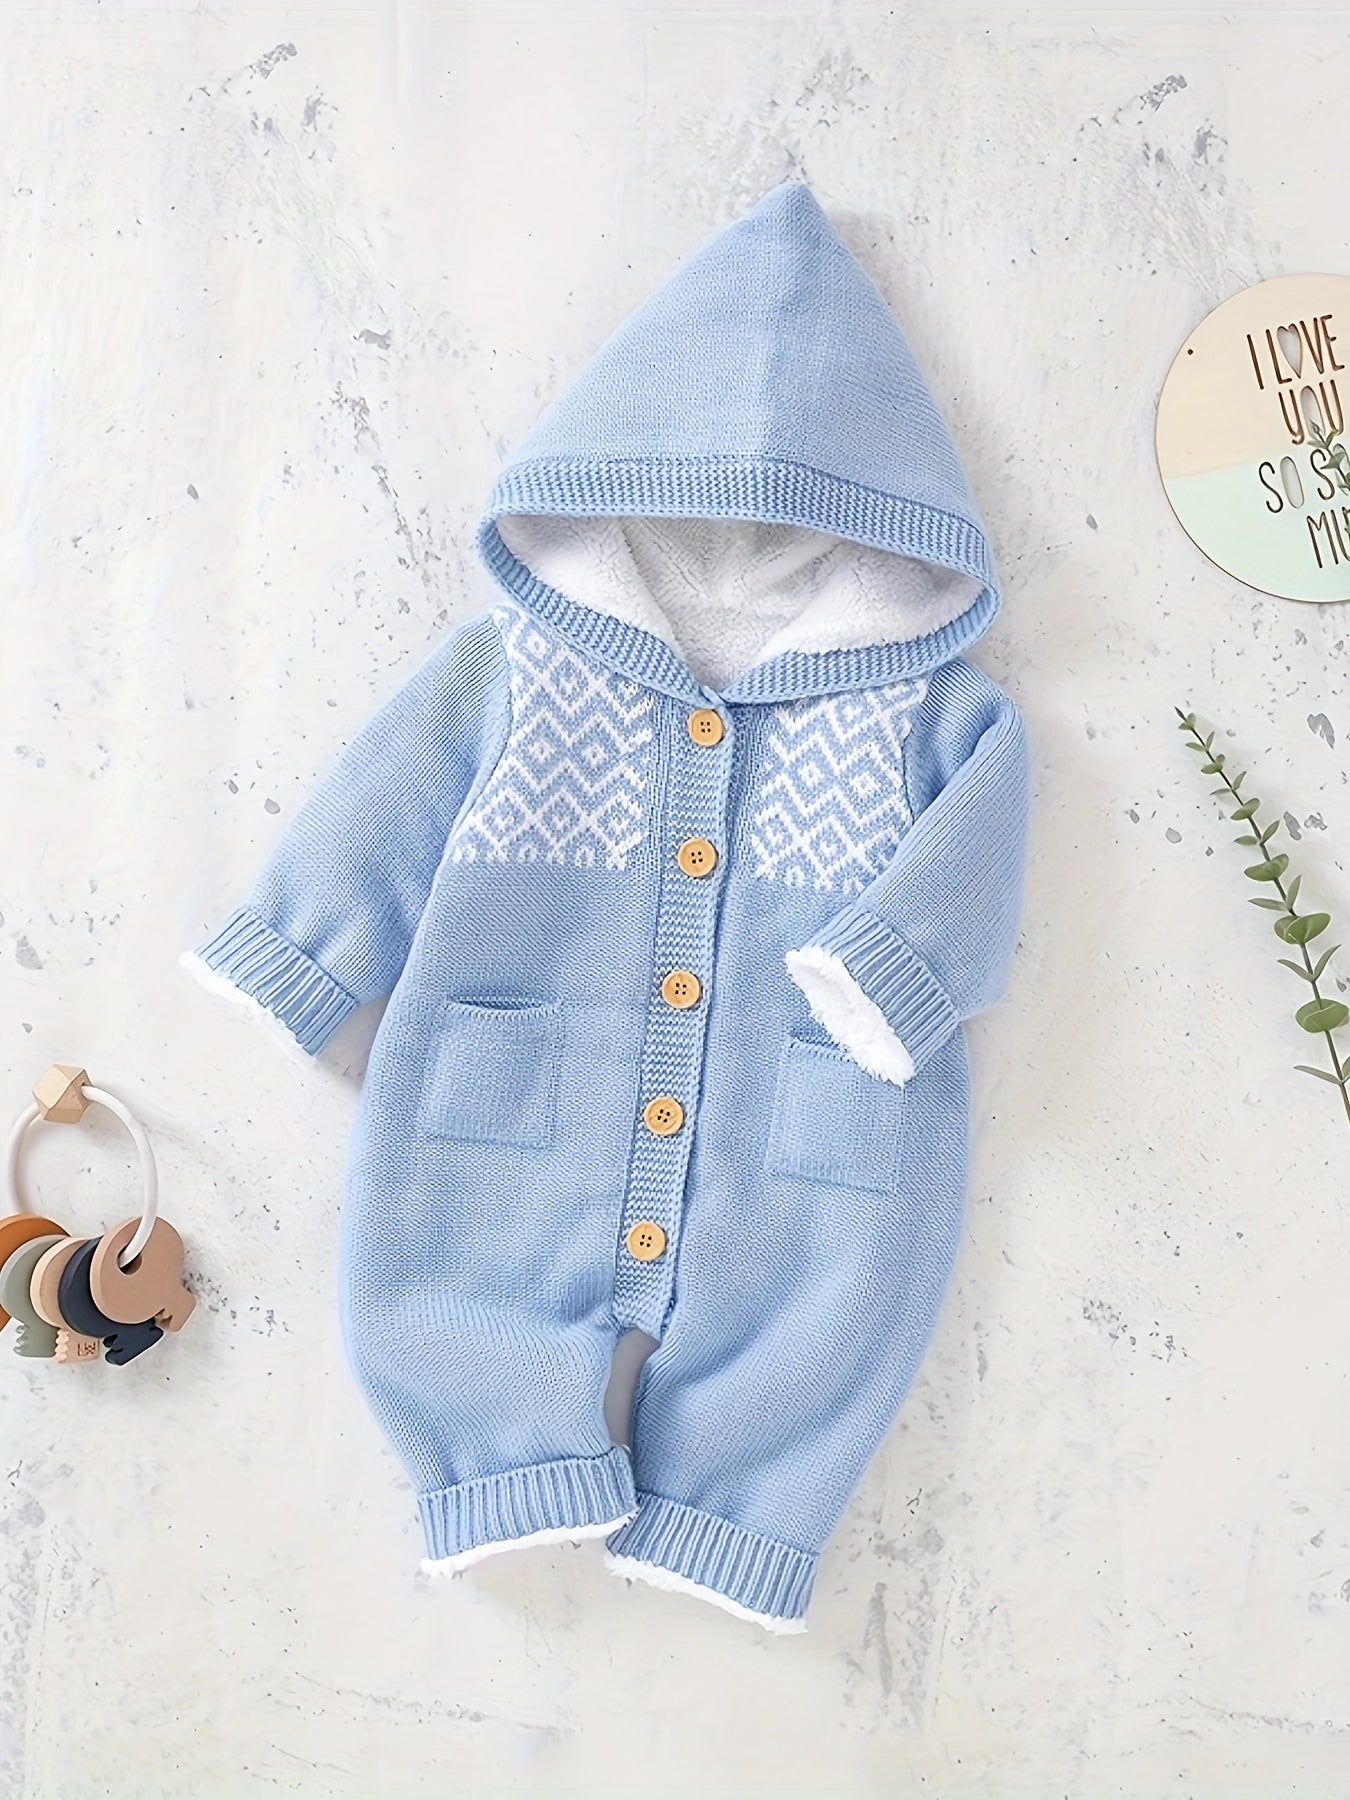 Newborn Baby's Knit Hooded Jumpsuit, Warm Long Sleeves Hooded Button Down Onesie For Winter/fall - Ammpoure Wellbeing